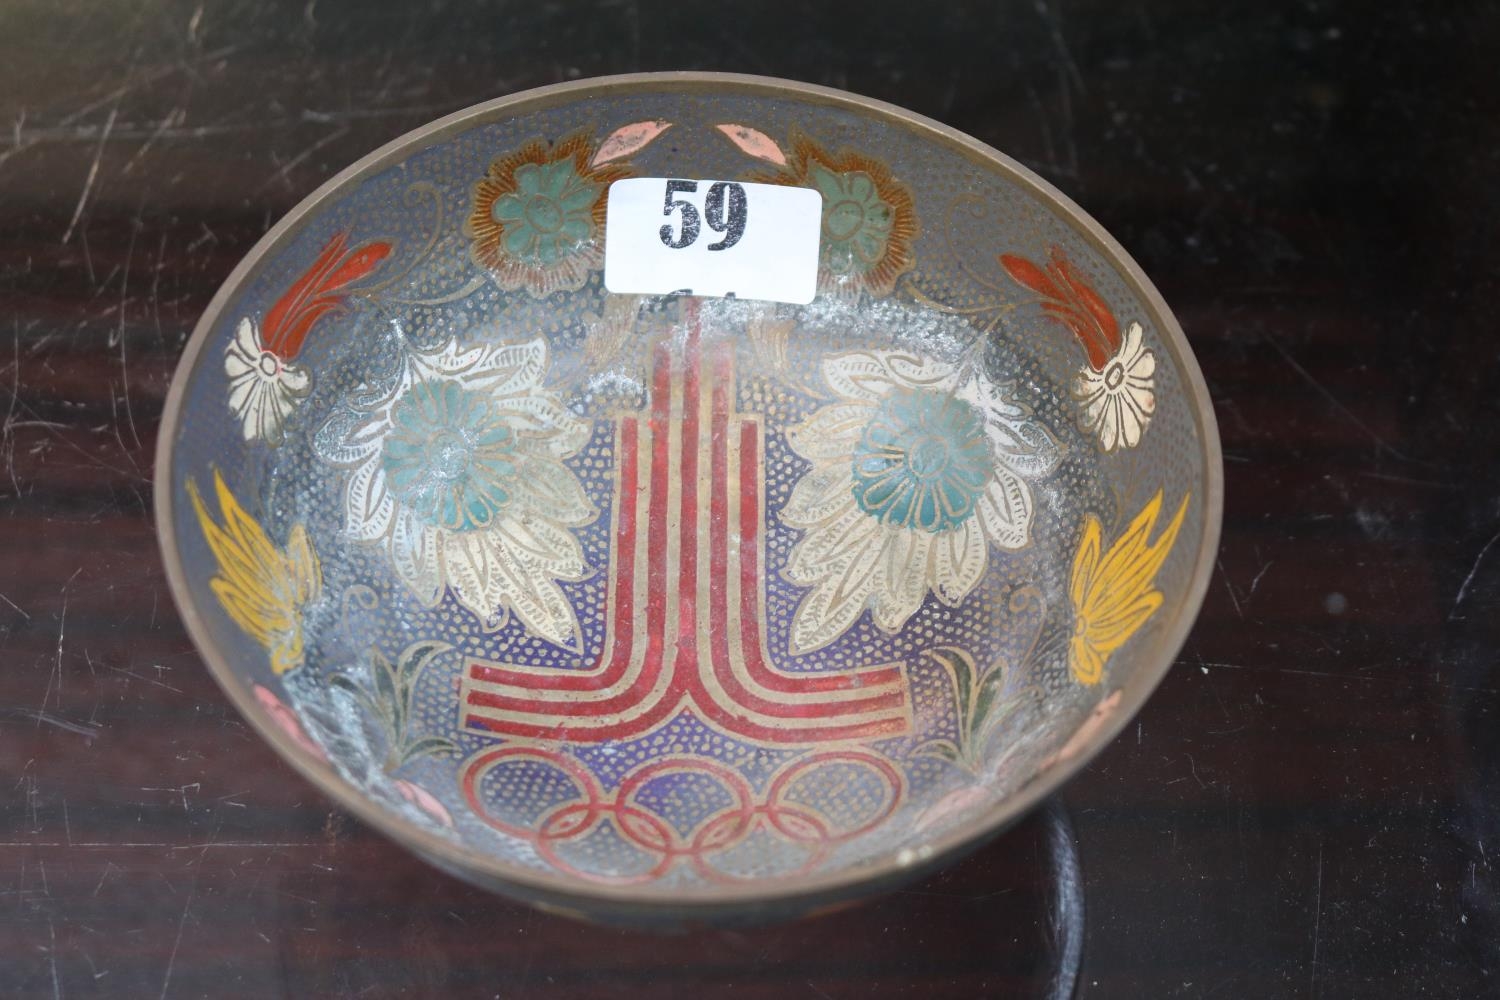 1980 Moscow Summer Olympics souvenir bowl, brass and hand painted, of far eastern influence.